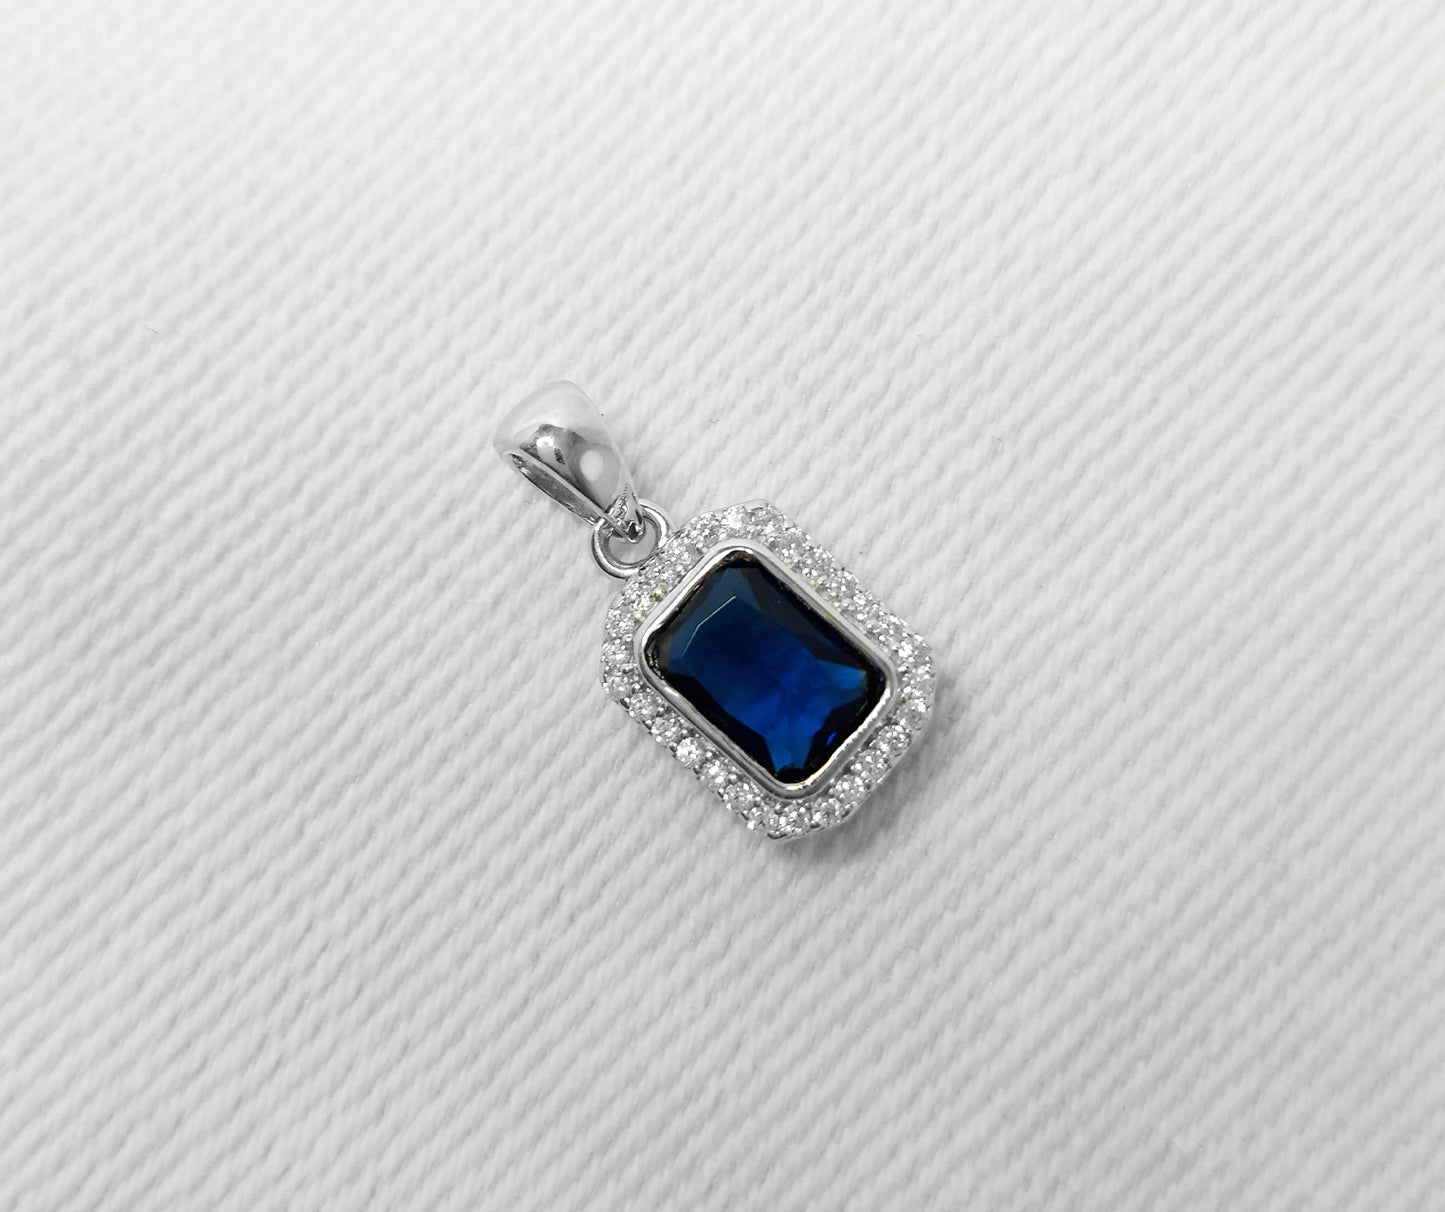 Sterling Silver Pendant with Cubic Zirconia Stones. Deep Blue Colour